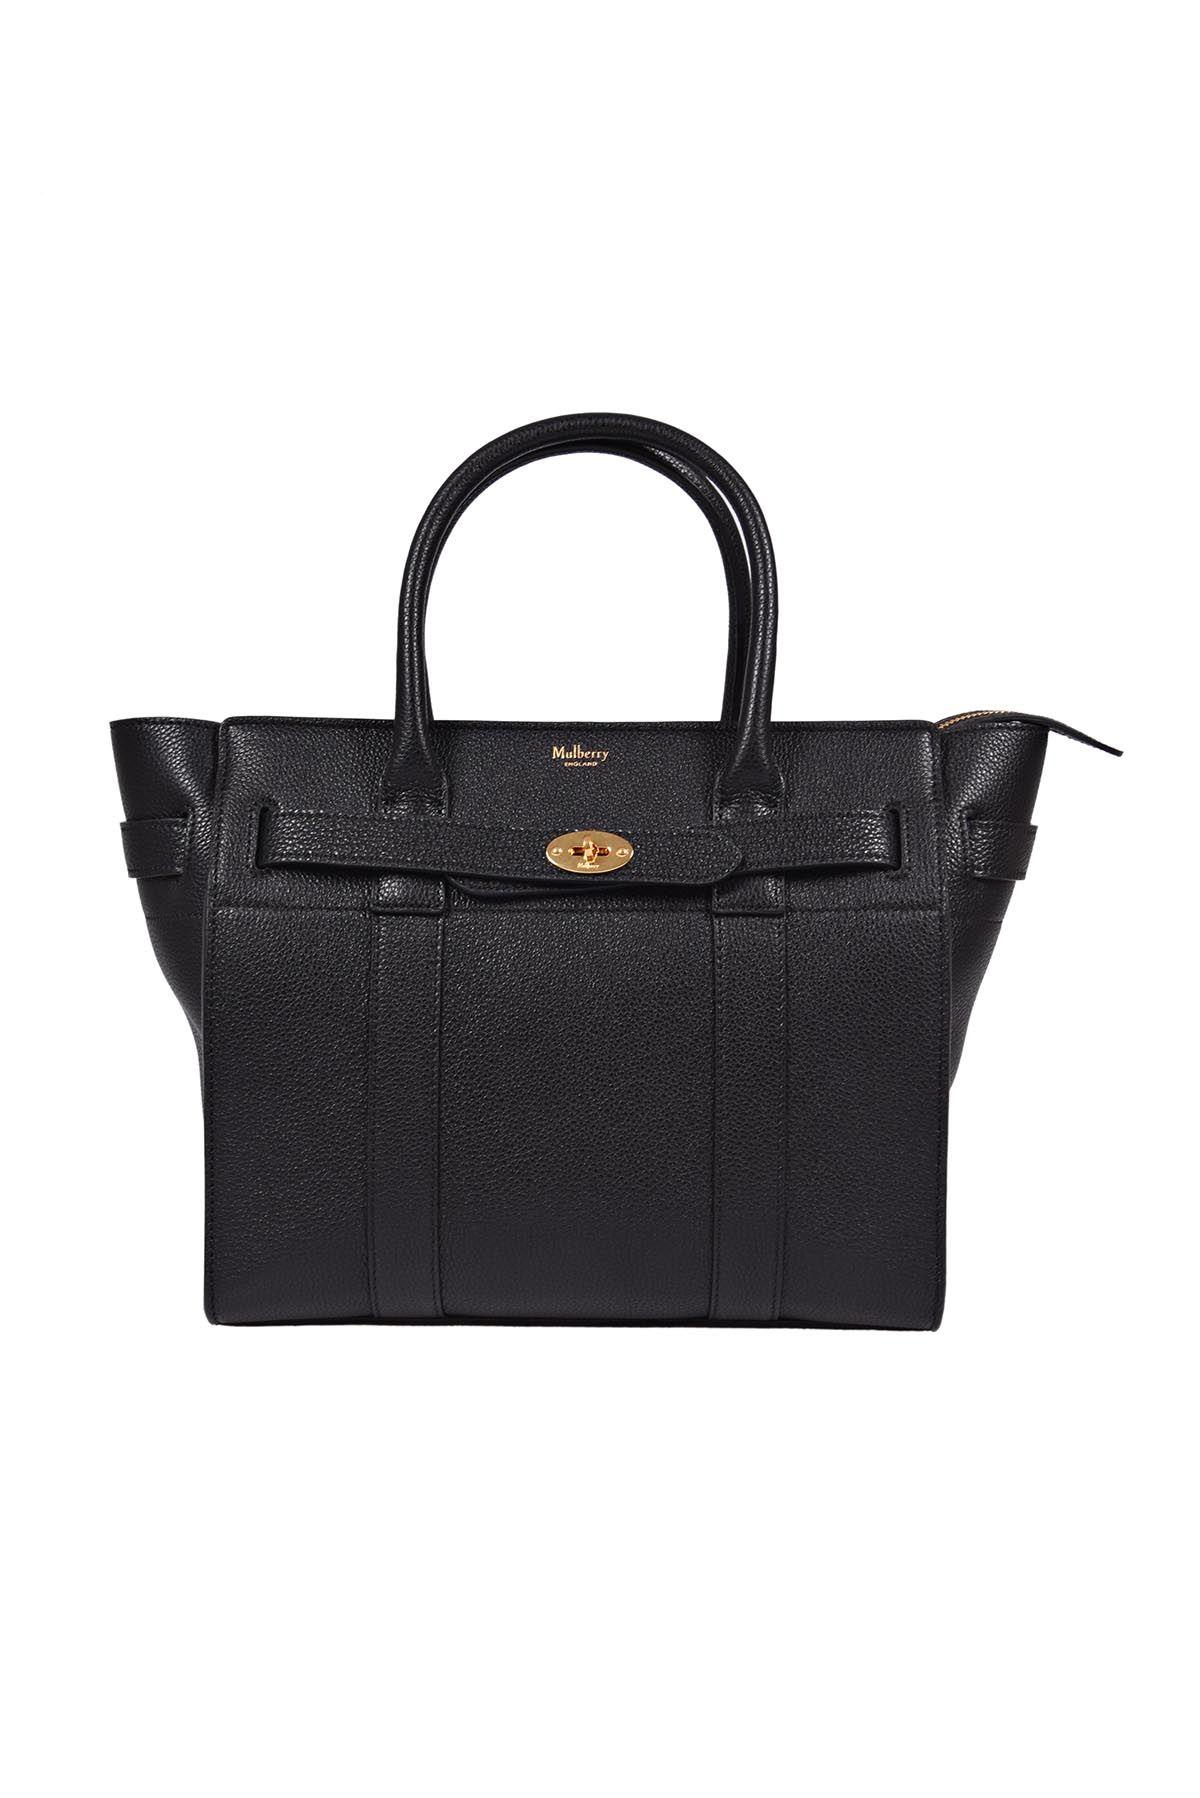 Mulberry Small Zipped Bayswater Tote In Black | ModeSens